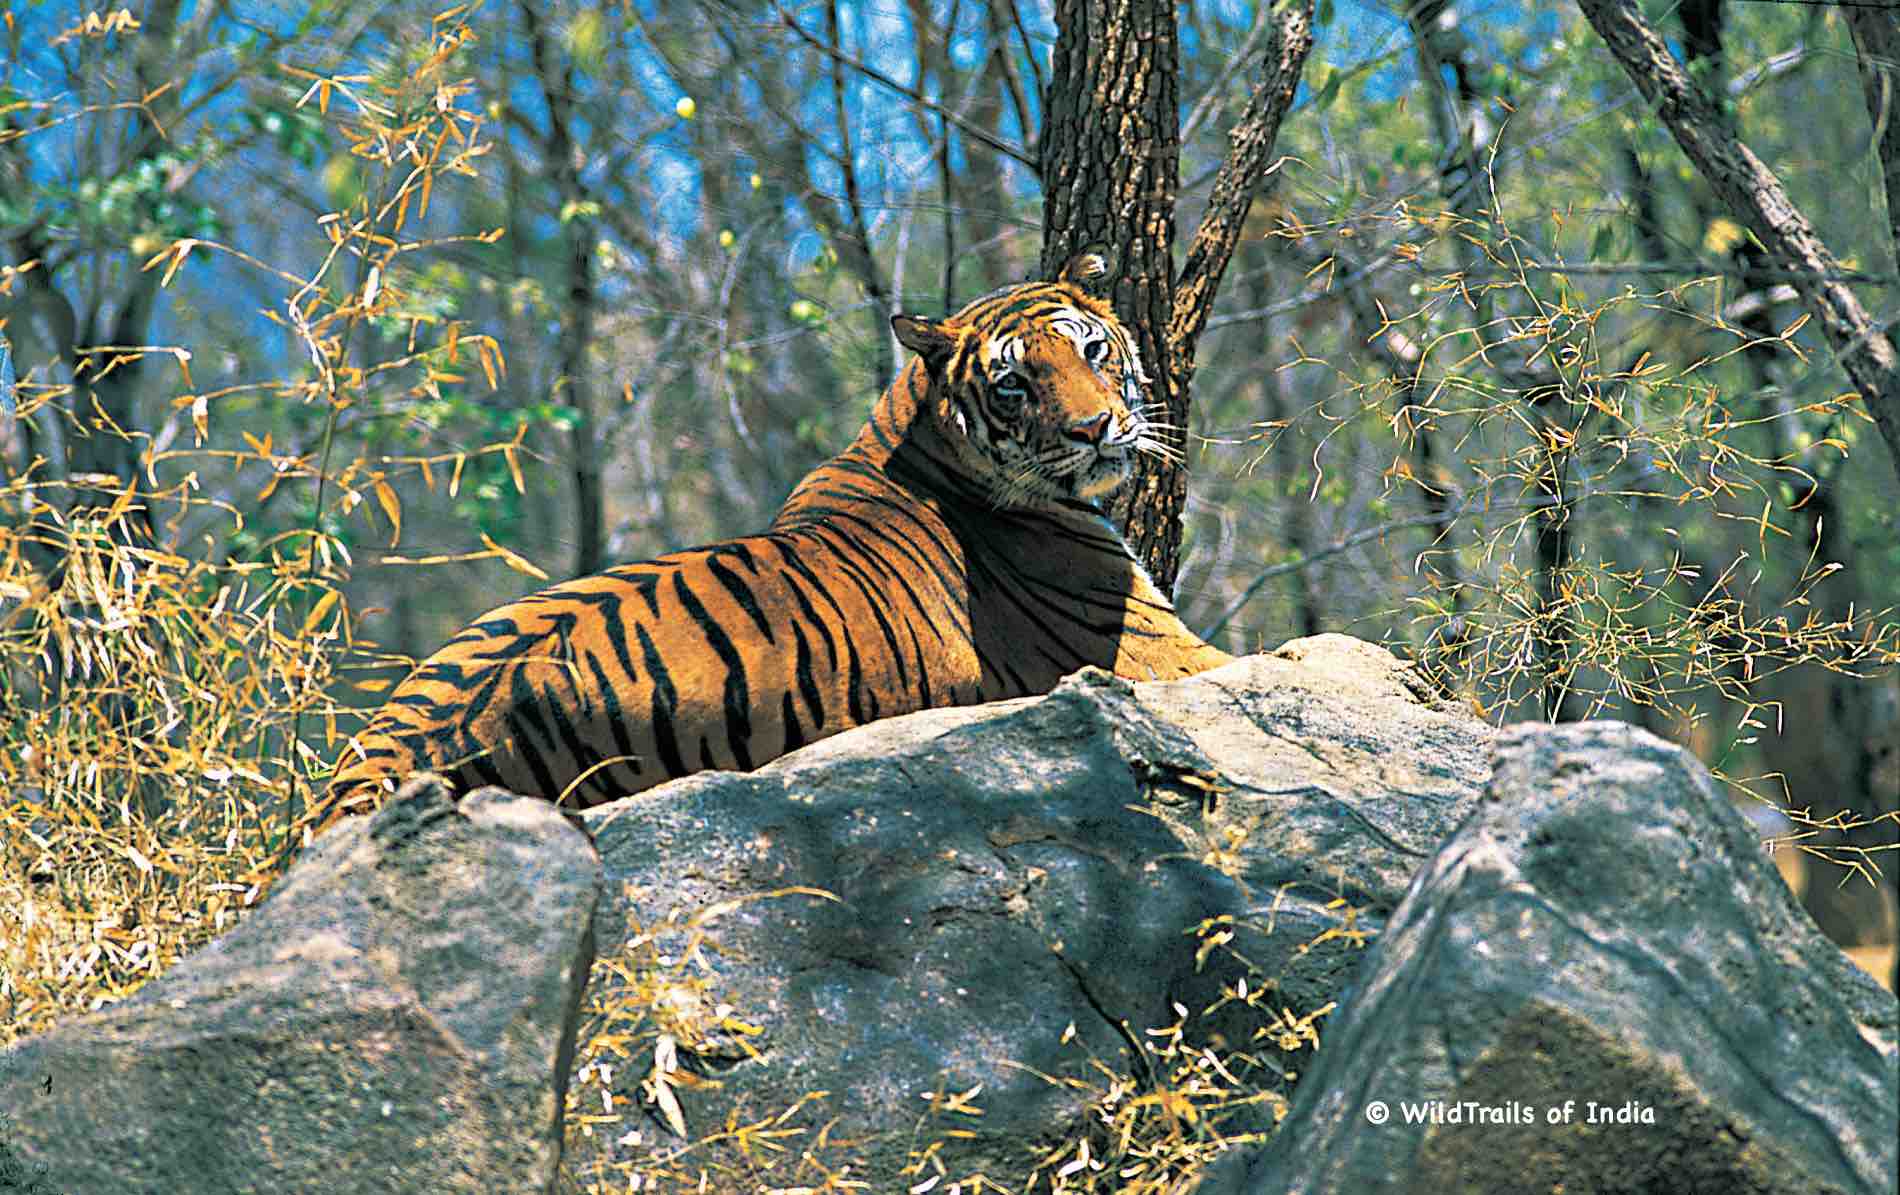 Parambikulam Wildlife Sanctuary. WildTrails of India - "One Stop Destination for all Indian Wildlife Enthusiasts"